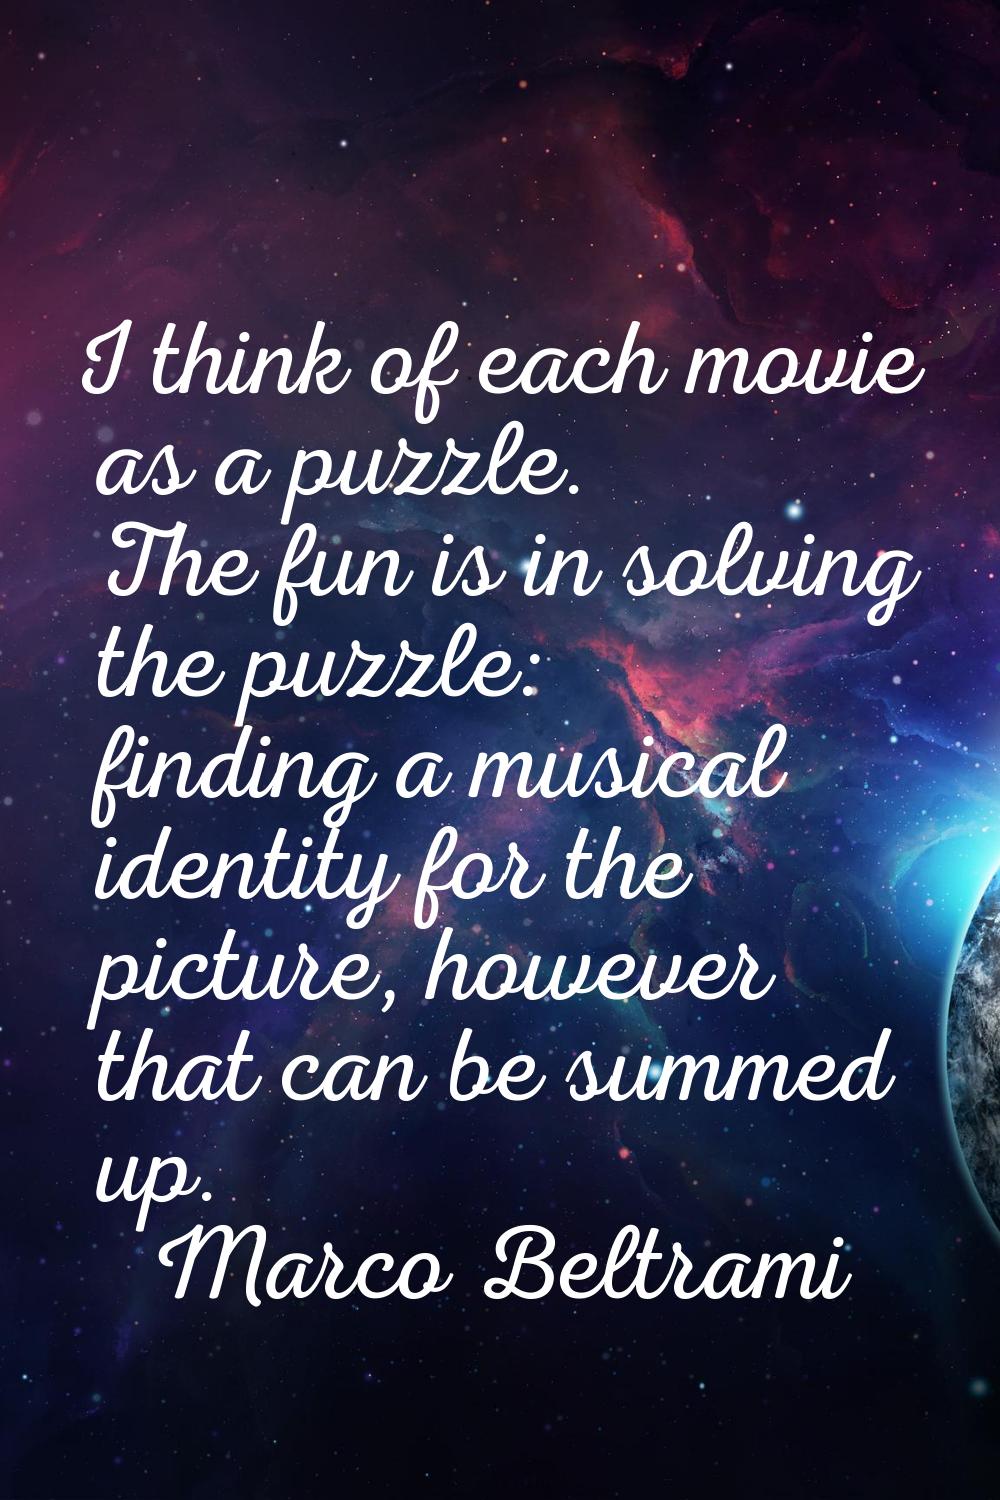 I think of each movie as a puzzle. The fun is in solving the puzzle: finding a musical identity for